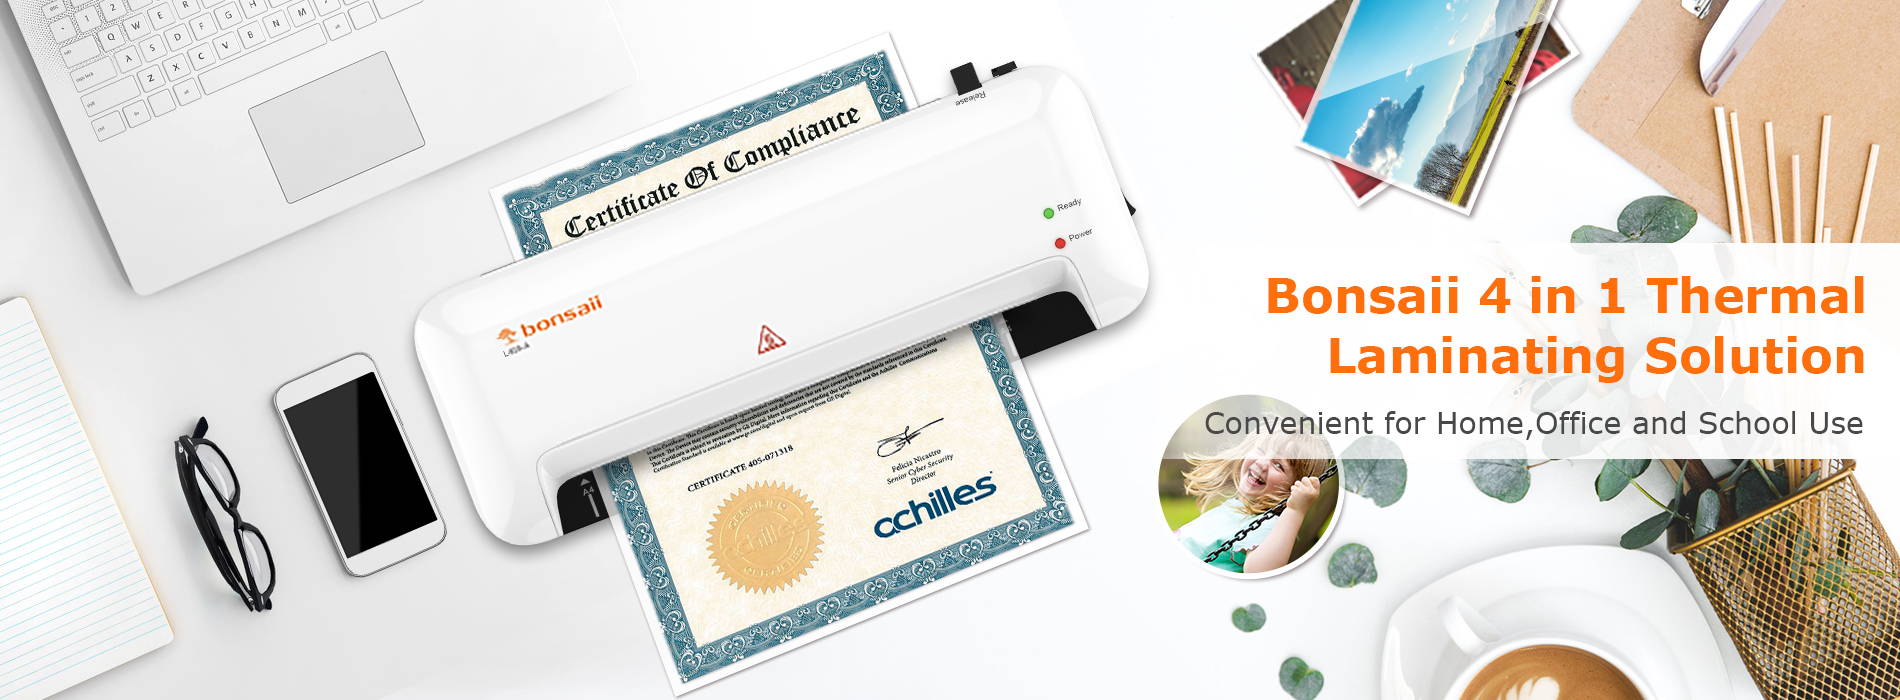  Bonsaii 4 in 1 Thermal Laminating Solution  Convenient for Home,Office and School Use